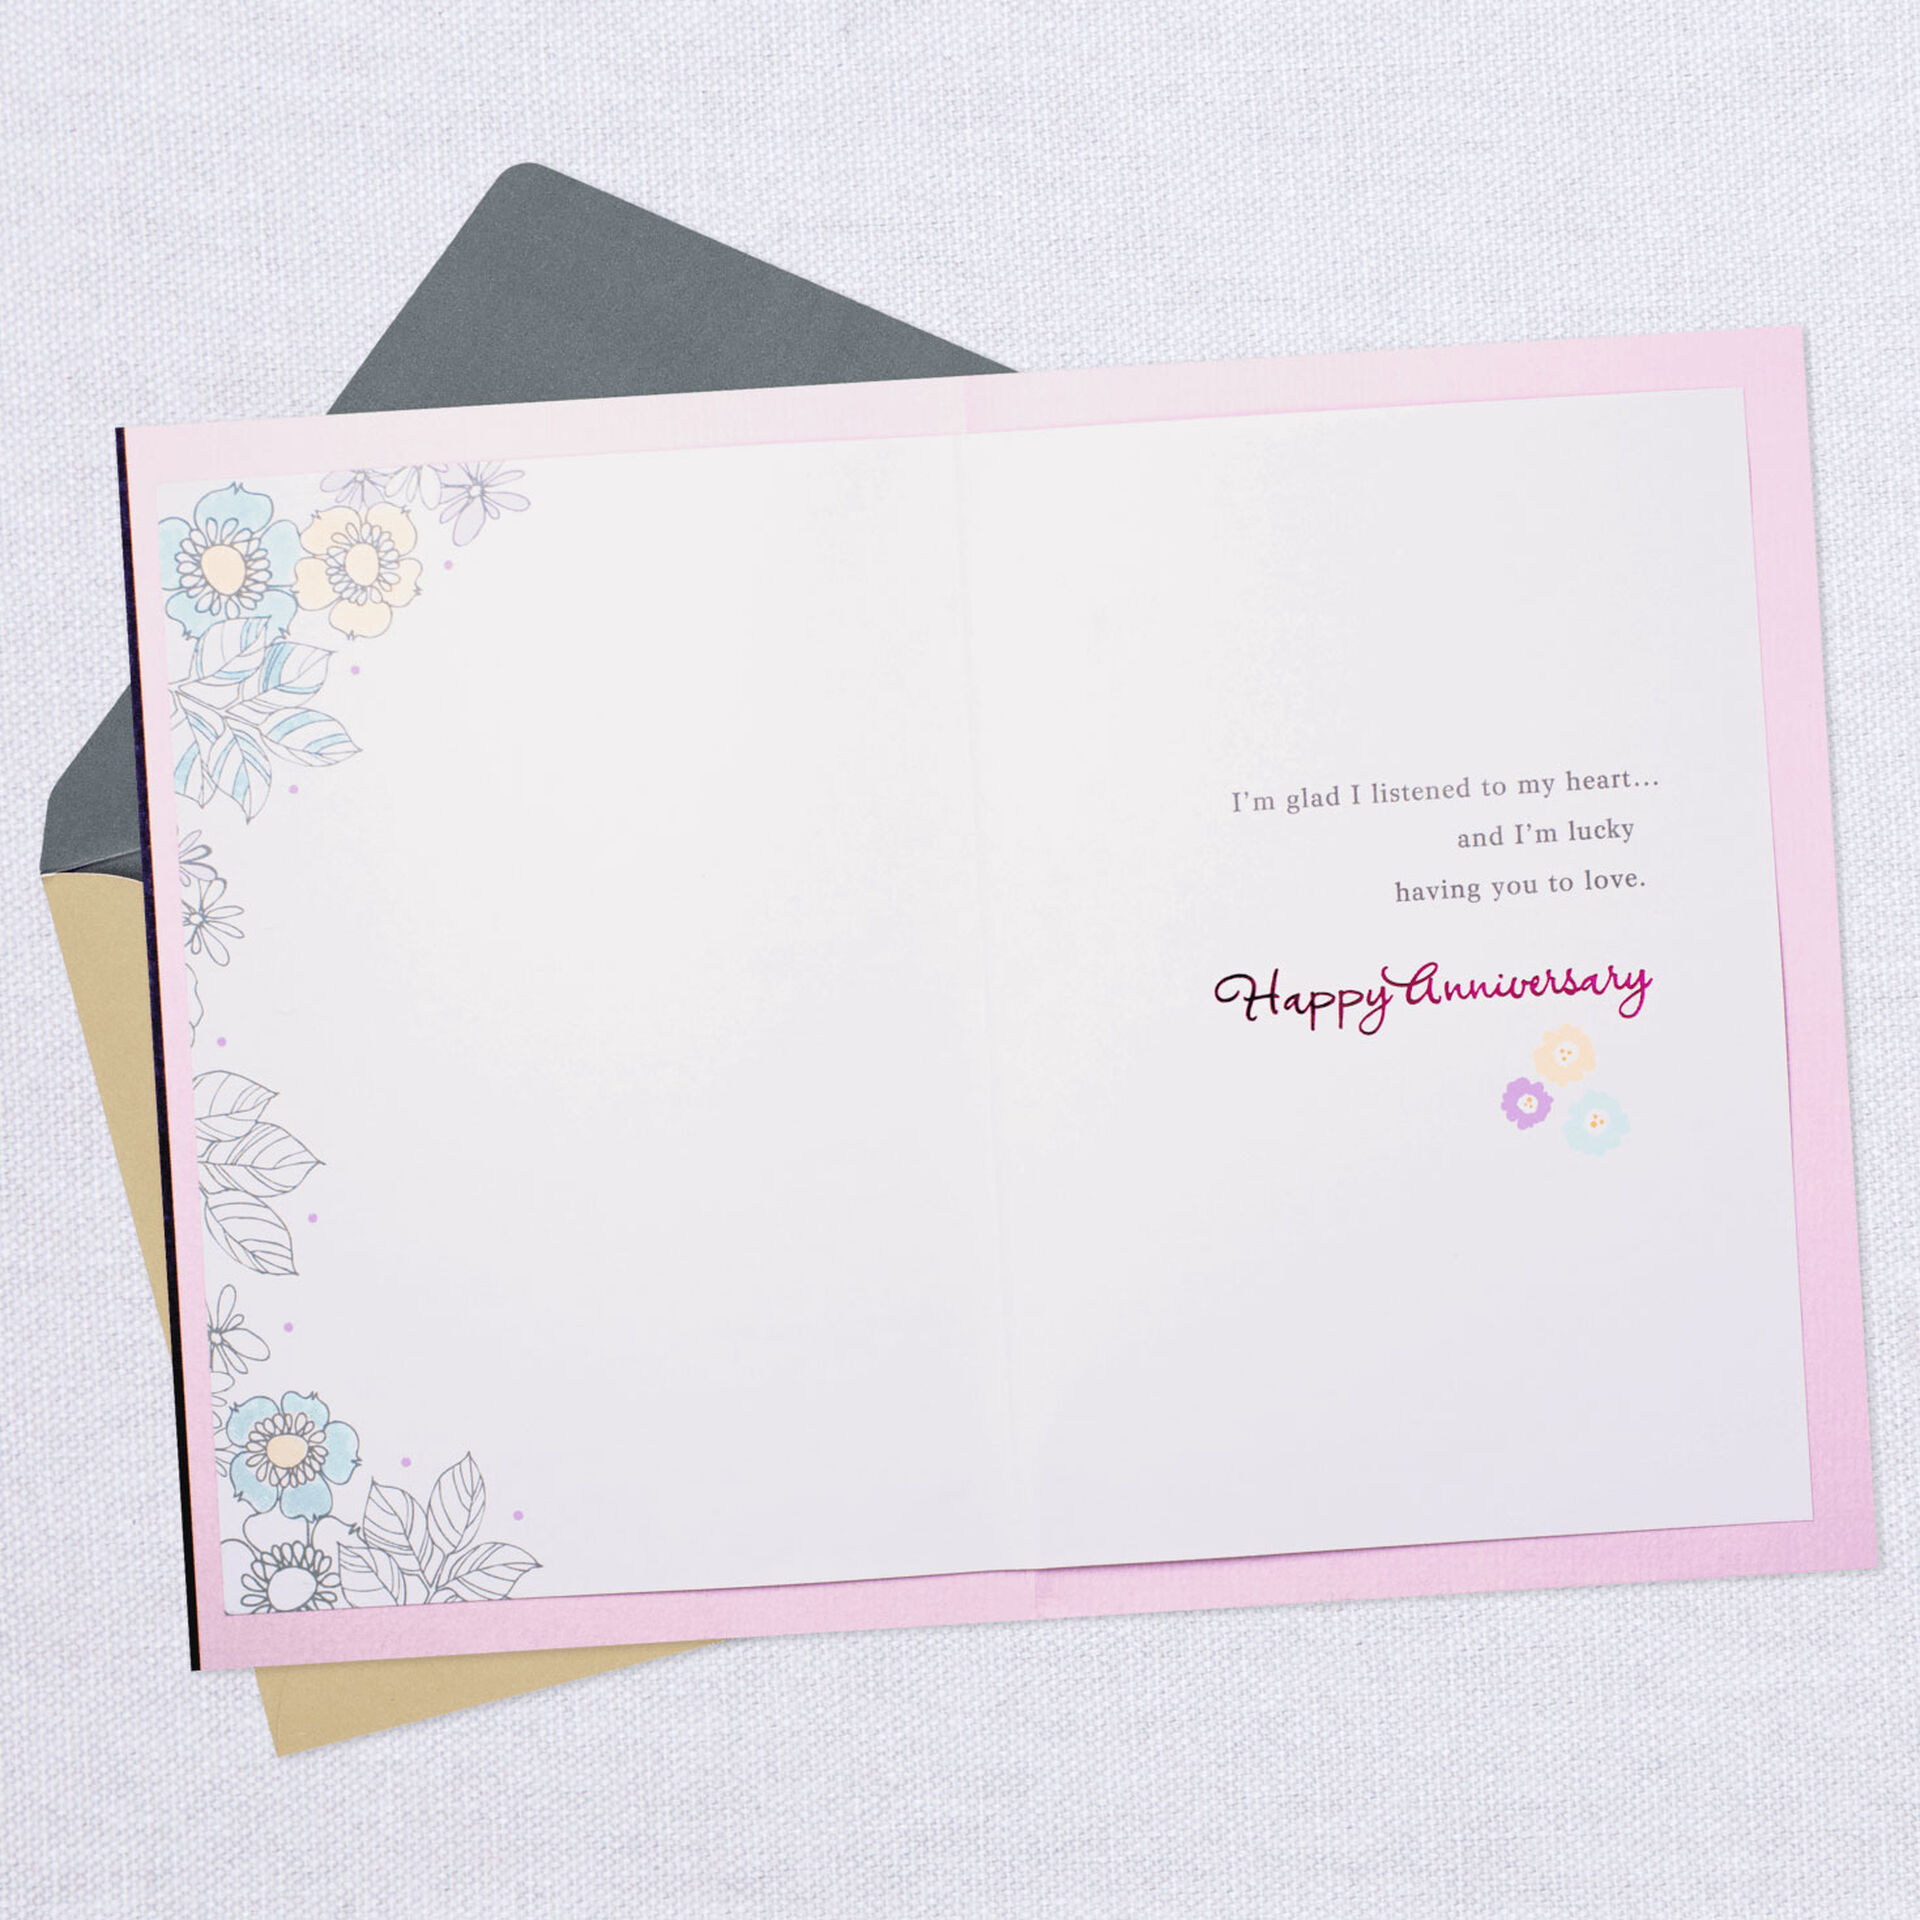 My-Heart-T-Me-Anniversary-Card-for-Wife_899AVY1863_03